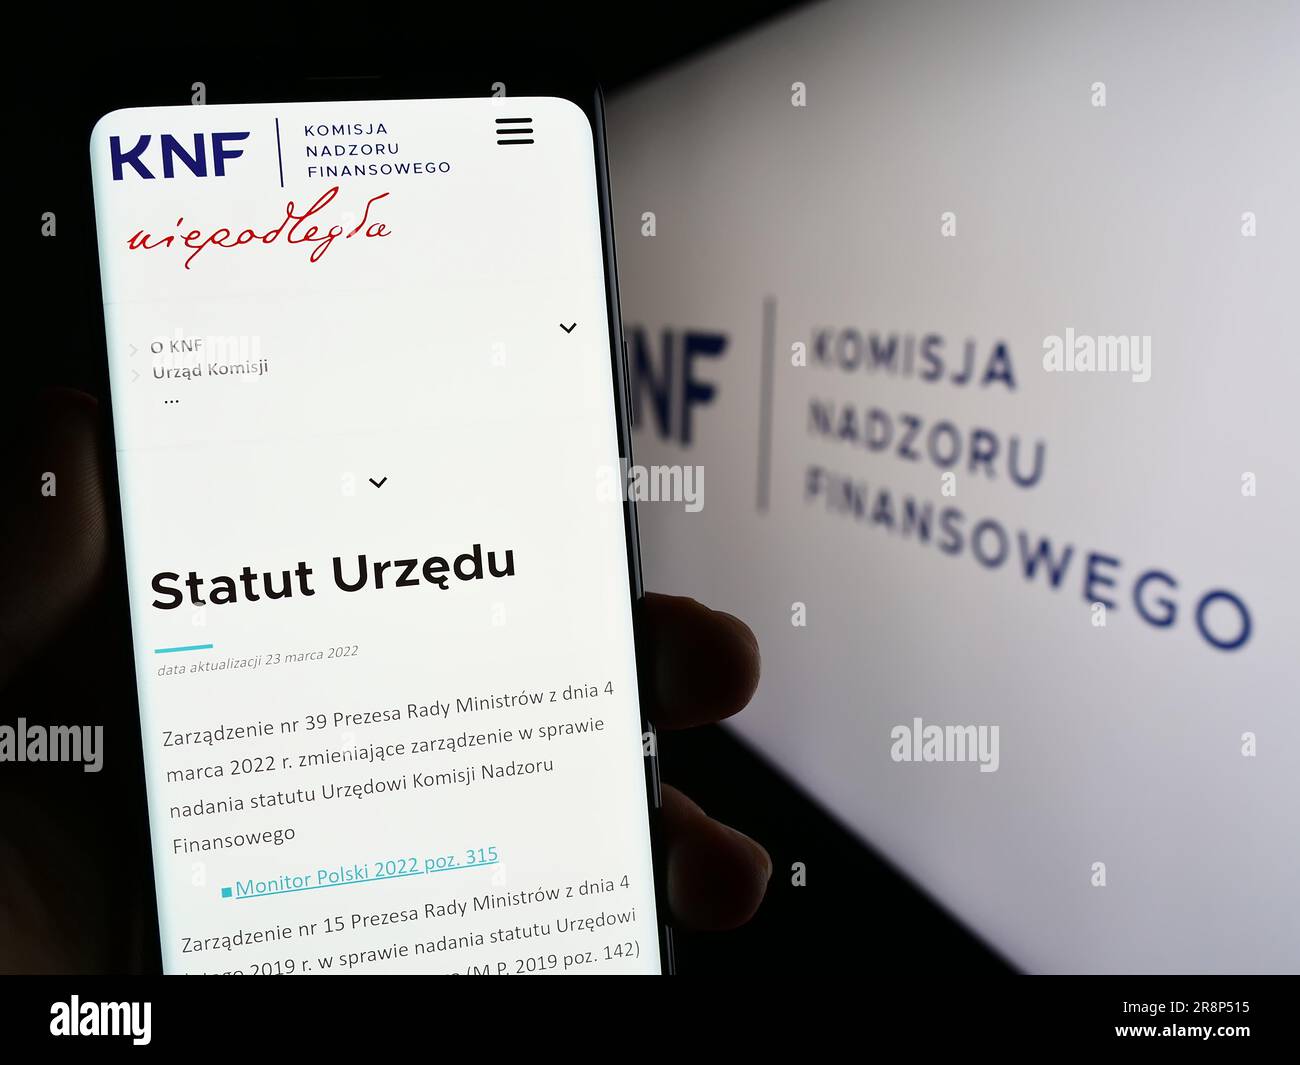 Person holding smartphone with webpage of authority Komisja Nadzoru Finansowego (KNF) on screen with logo. Focus on center of phone display. Stock Photo